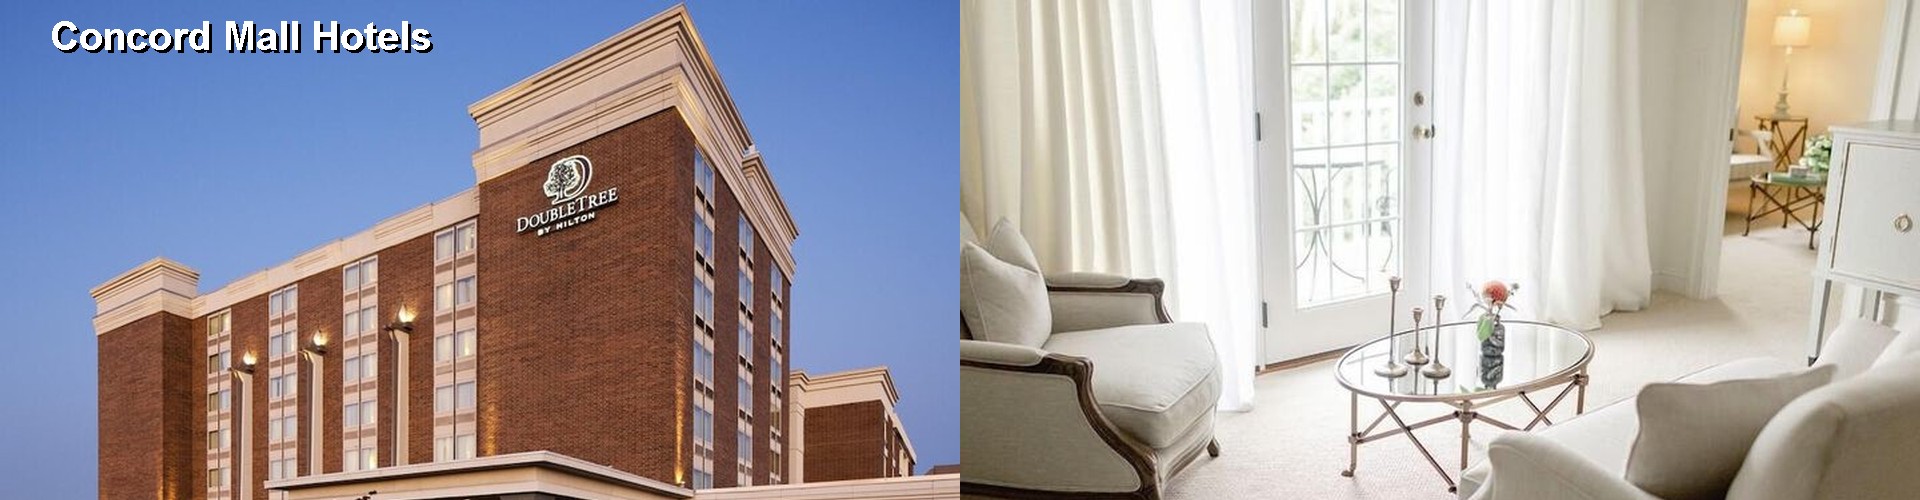 2 Best Hotels near Concord Mall